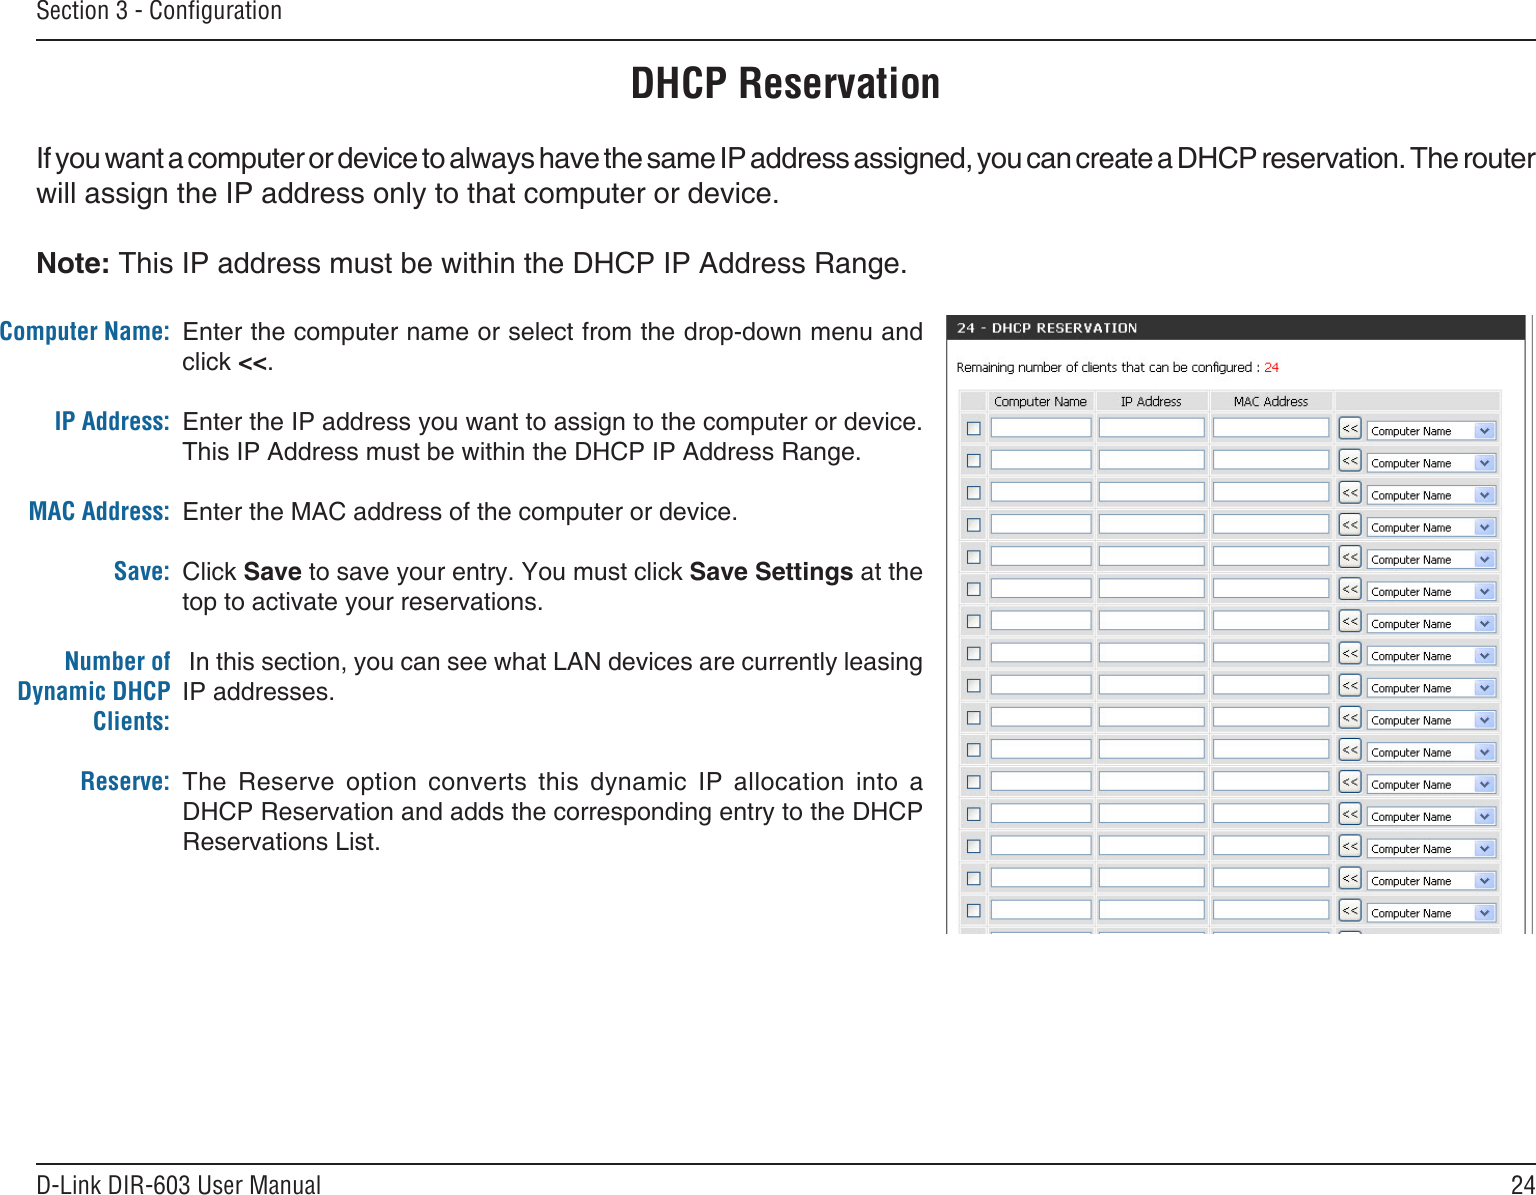 24D-Link DIR-603 User ManualSection 3 - CongurationDHCP ReservationIf you want a computer or device to always have the same IP address assigned, you can create a DHCP reservation. The router will assign the IP address only to that computer or device. Note: This IP address must be within the DHCP IP Address Range.Enter the computer name or select from the drop-down menu and click &lt;&lt;.Enter the IP address you want to assign to the computer or device. This IP Address must be within the DHCP IP Address Range.Enter the MAC address of the computer or device.Click Save to save your entry. You must click Save Settings at the top to activate your reservations.  In this section, you can see what LAN devices are currently leasing IP addresses.The  Reserve  option  converts  this  dynamic  IP  allocation  into  a DHCP Reservation and adds the corresponding entry to the DHCP Reservations List.Computer Name:IP Address:MAC Address:Save:Number of Dynamic DHCP Clients:Reserve: